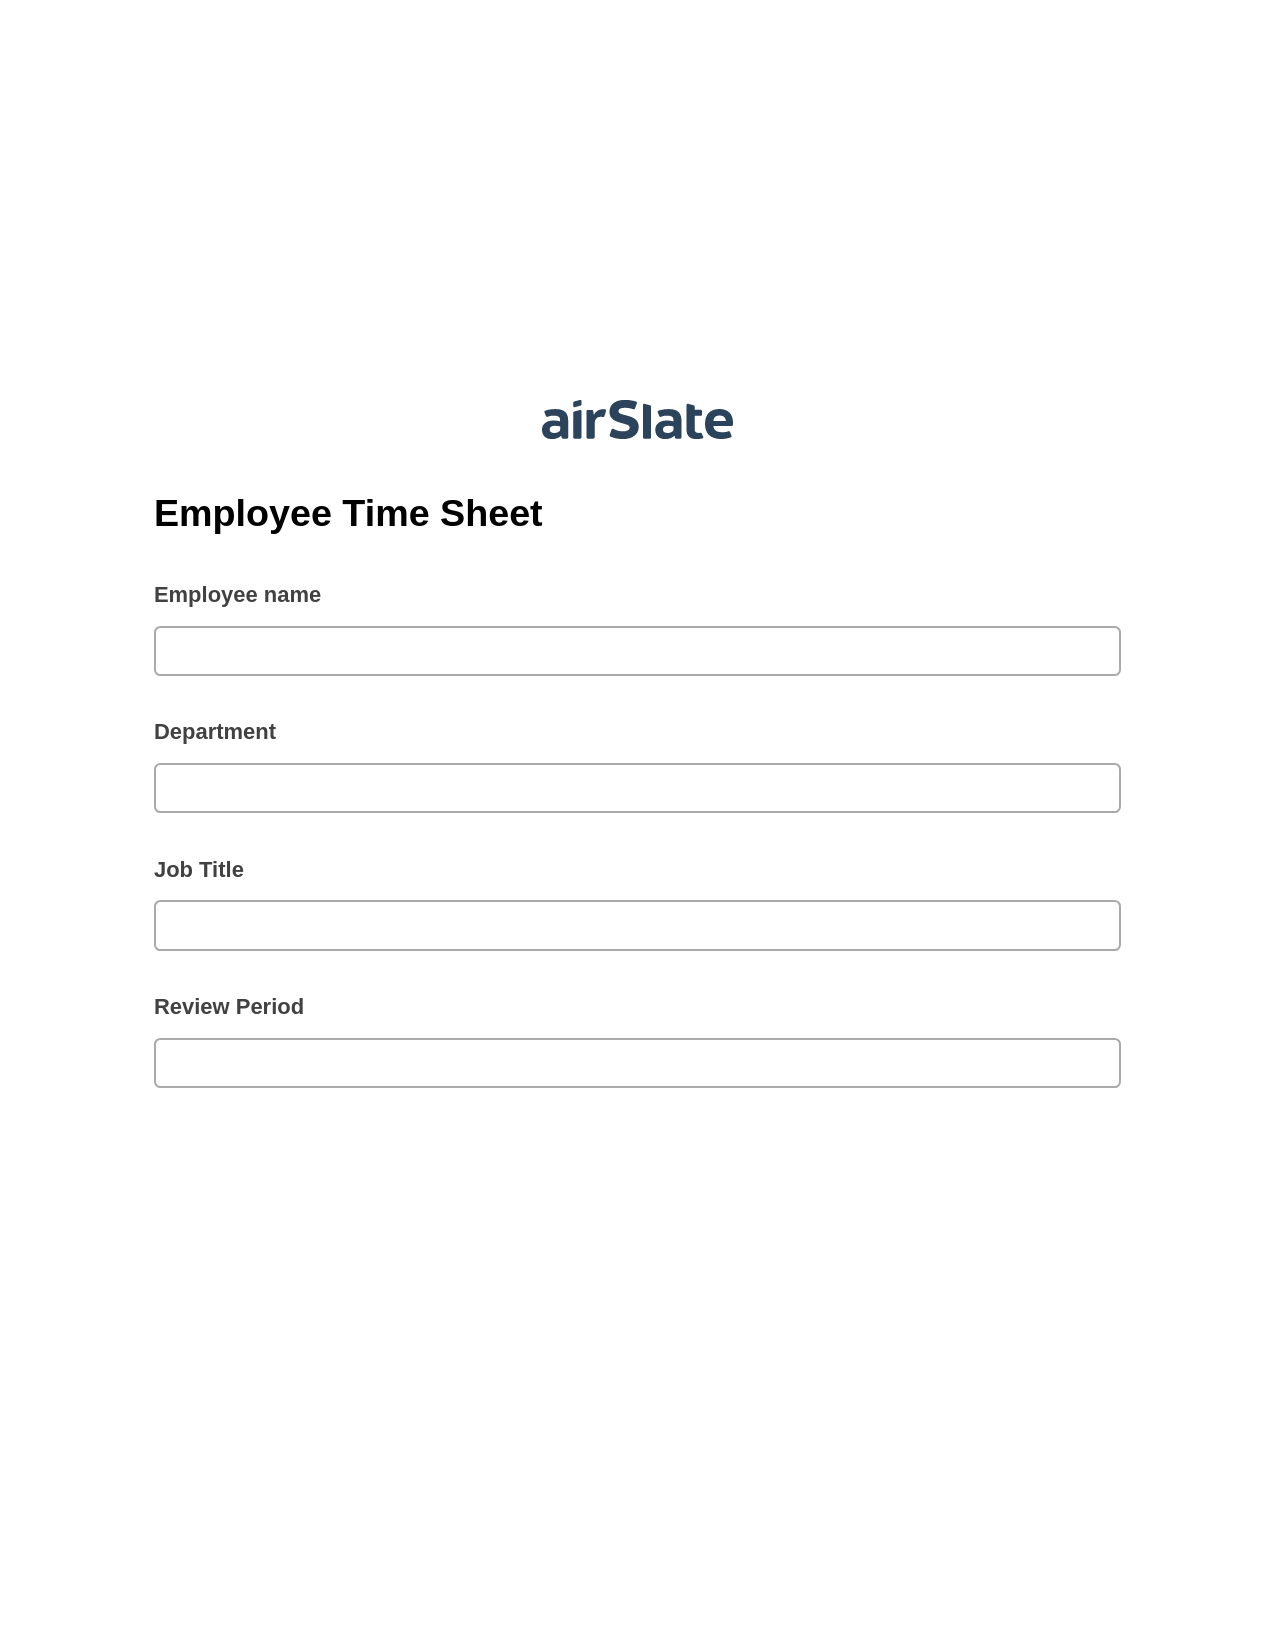 Multirole Employee Time Sheet Pre-fill Dropdowns from Airtable, Create slate addon, Archive to Google Drive Bot